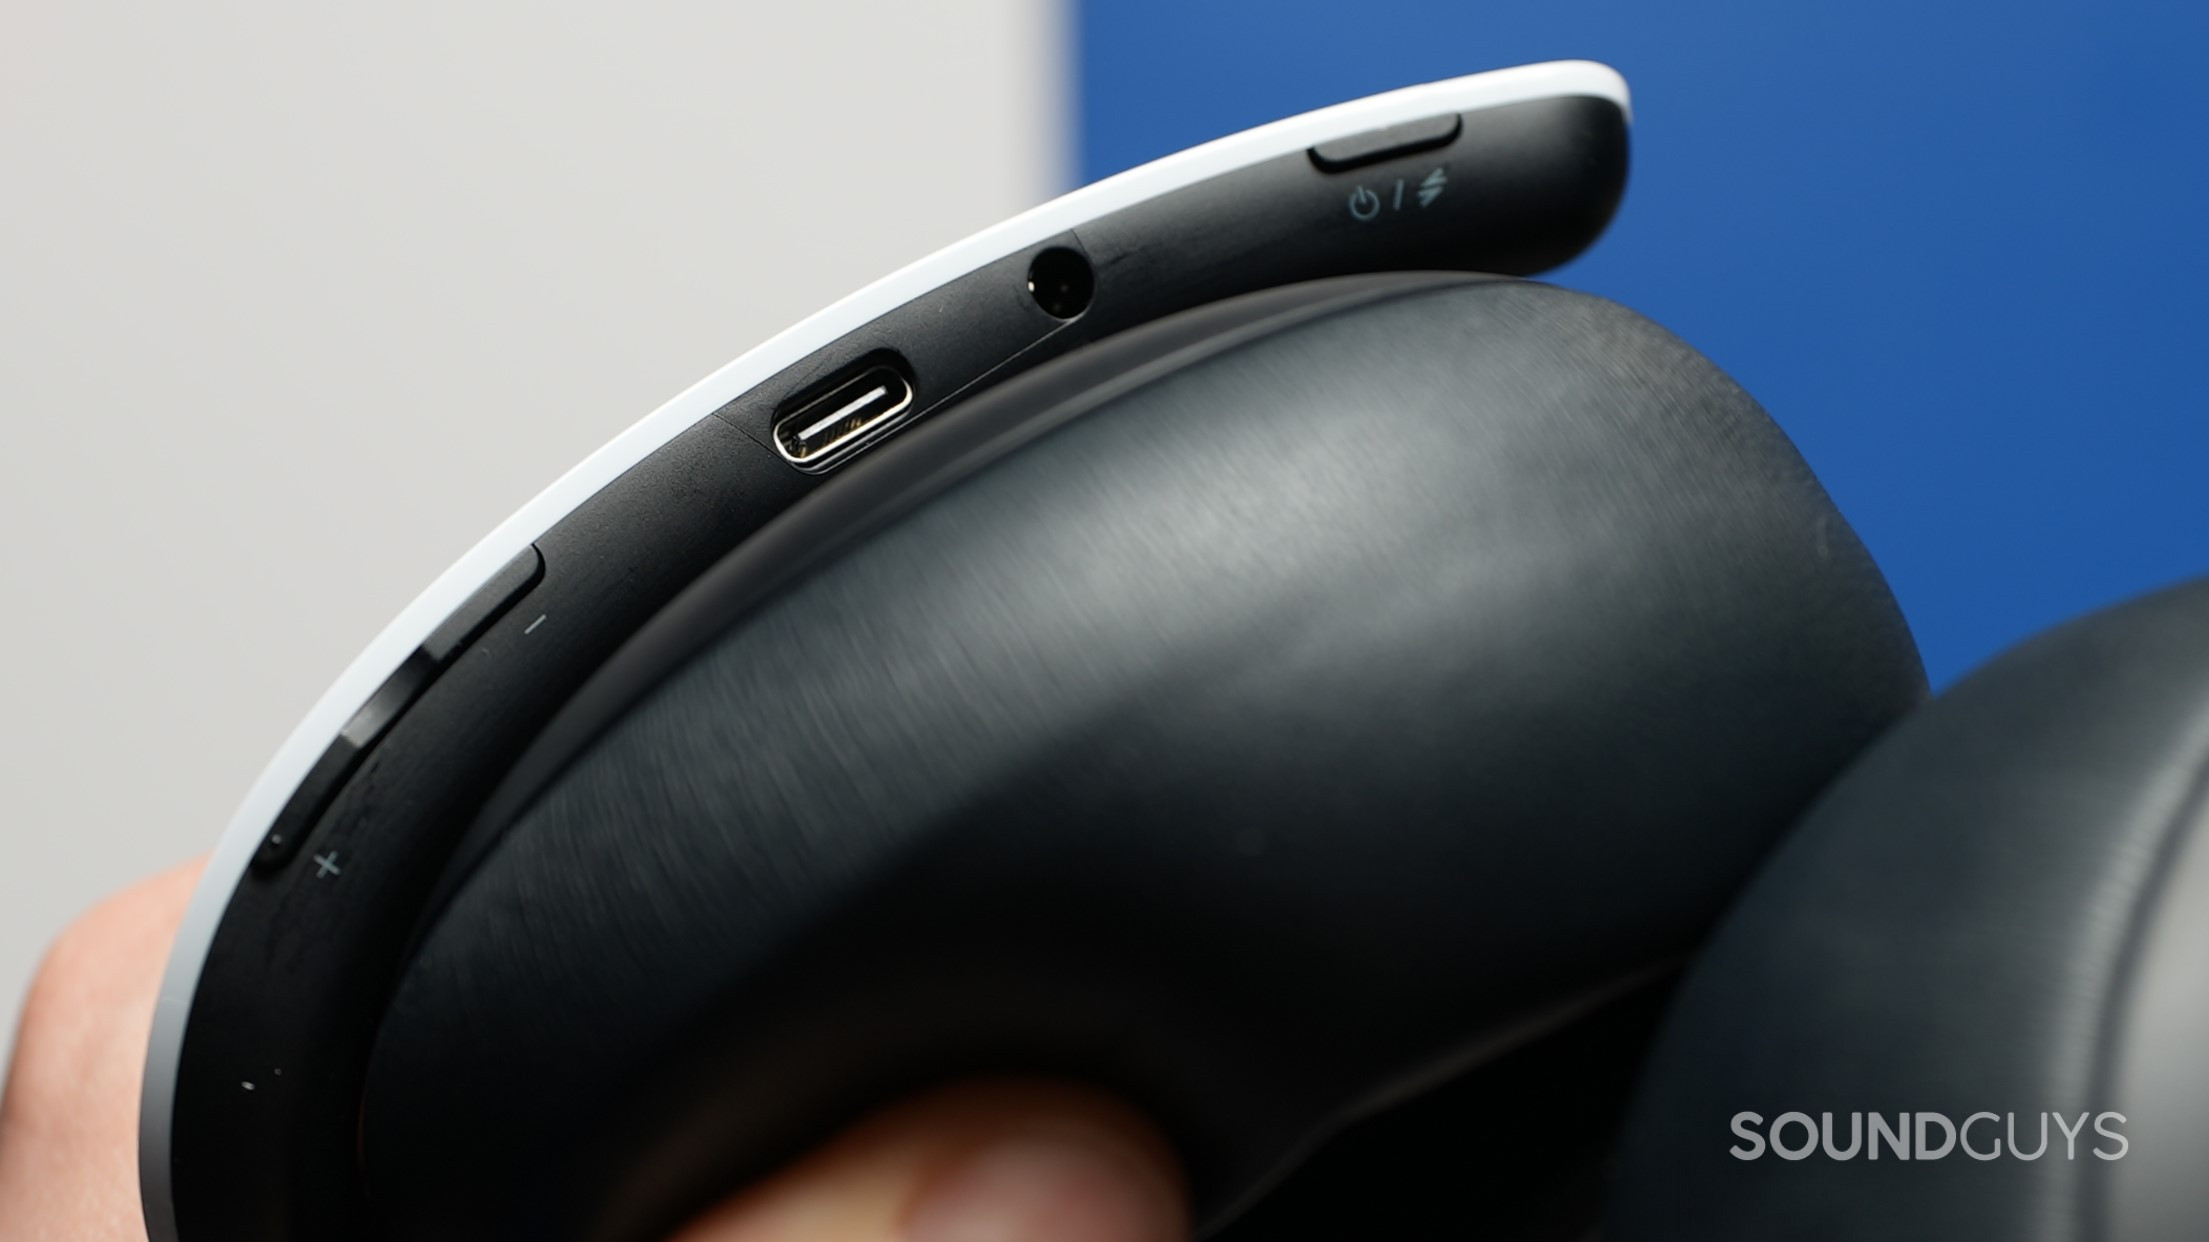 Physical button controls on the Pule Elite headset.